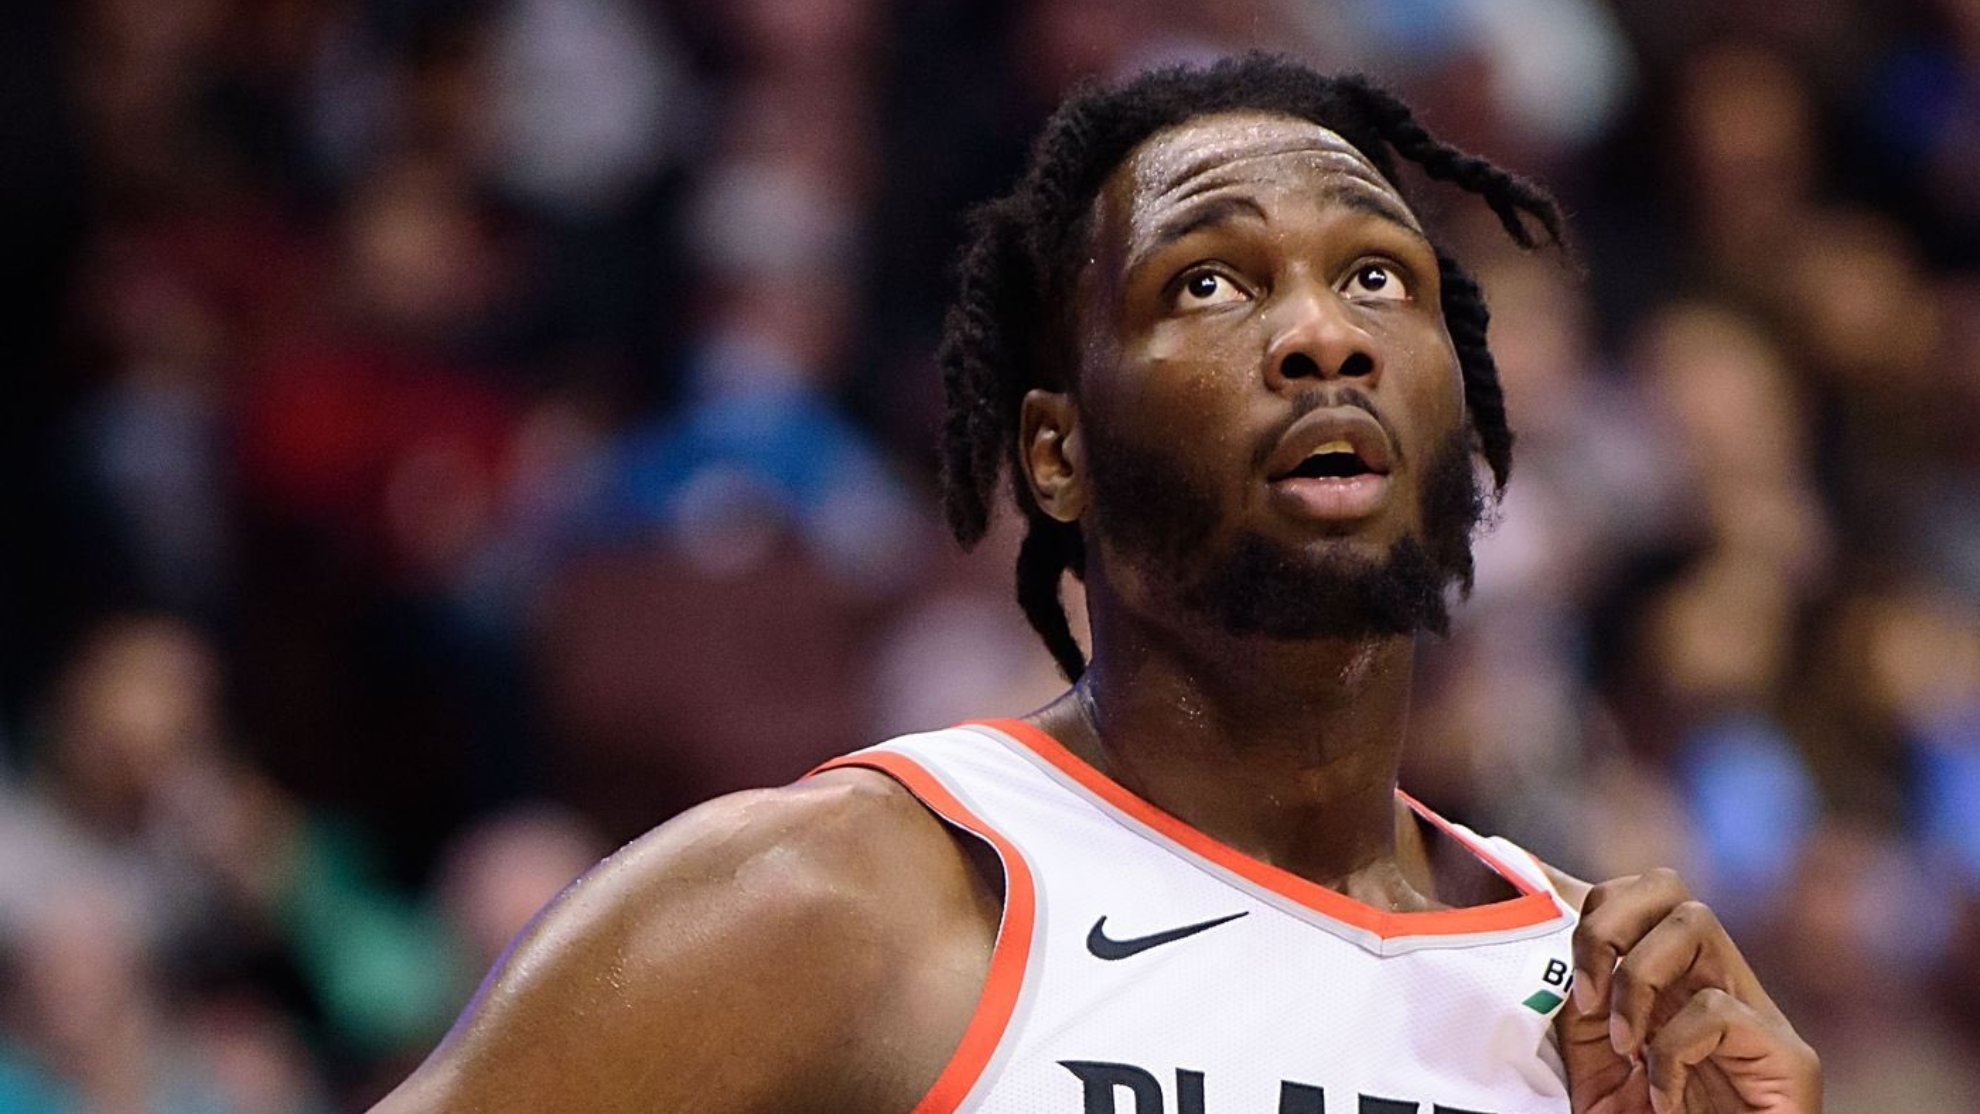 Caleb Swanigan dies at age 25; Played in the NBA and was a Purdue